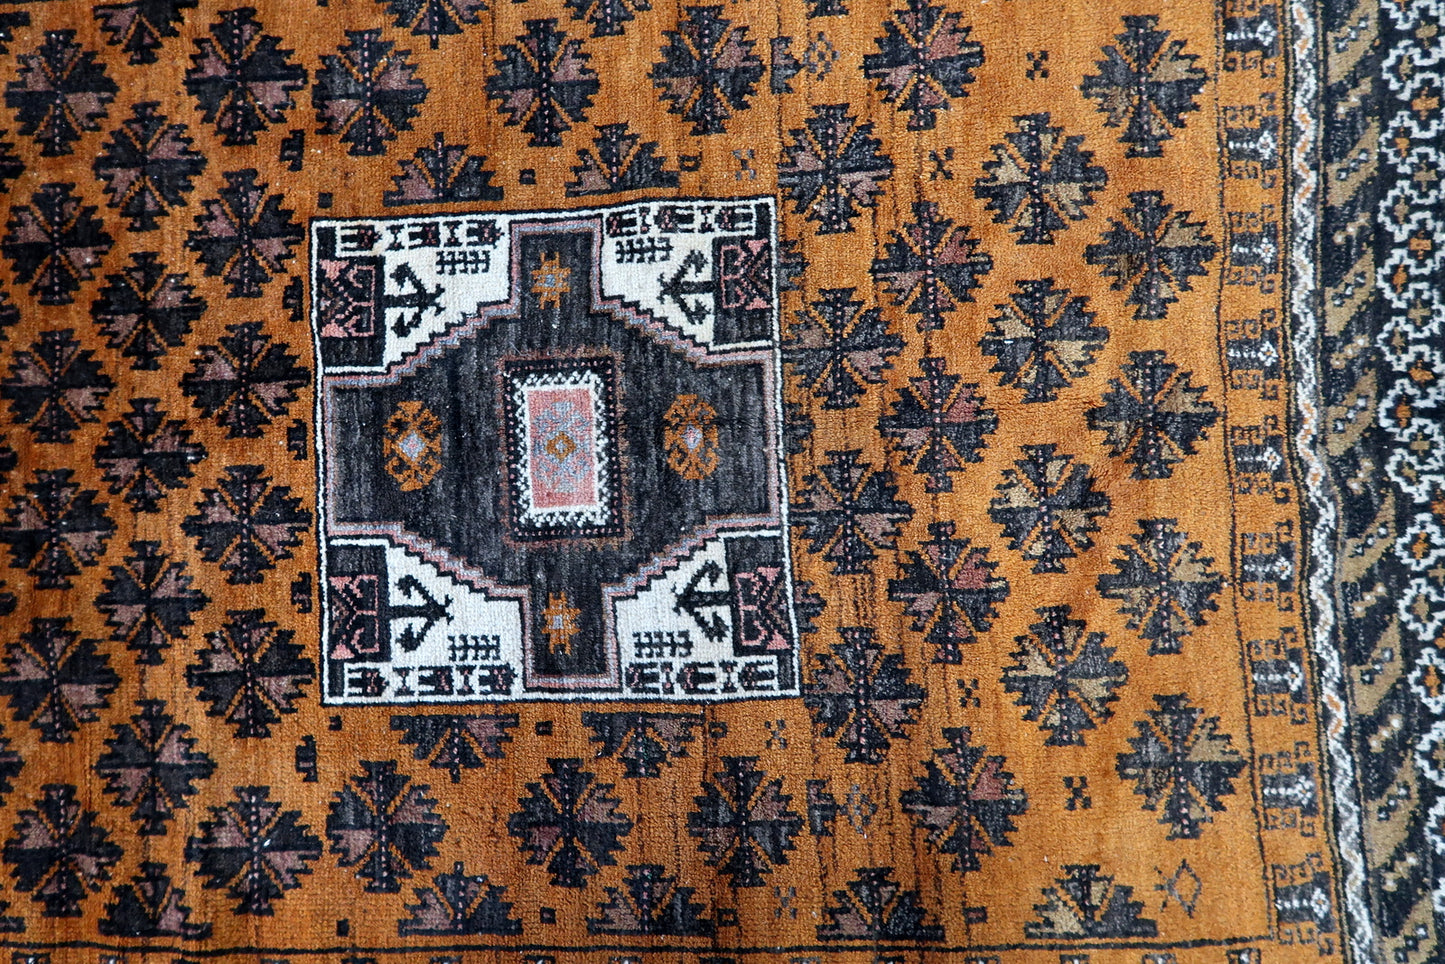 Overhead shot of the Afghan Baluch rug displaying its detailed center motifs